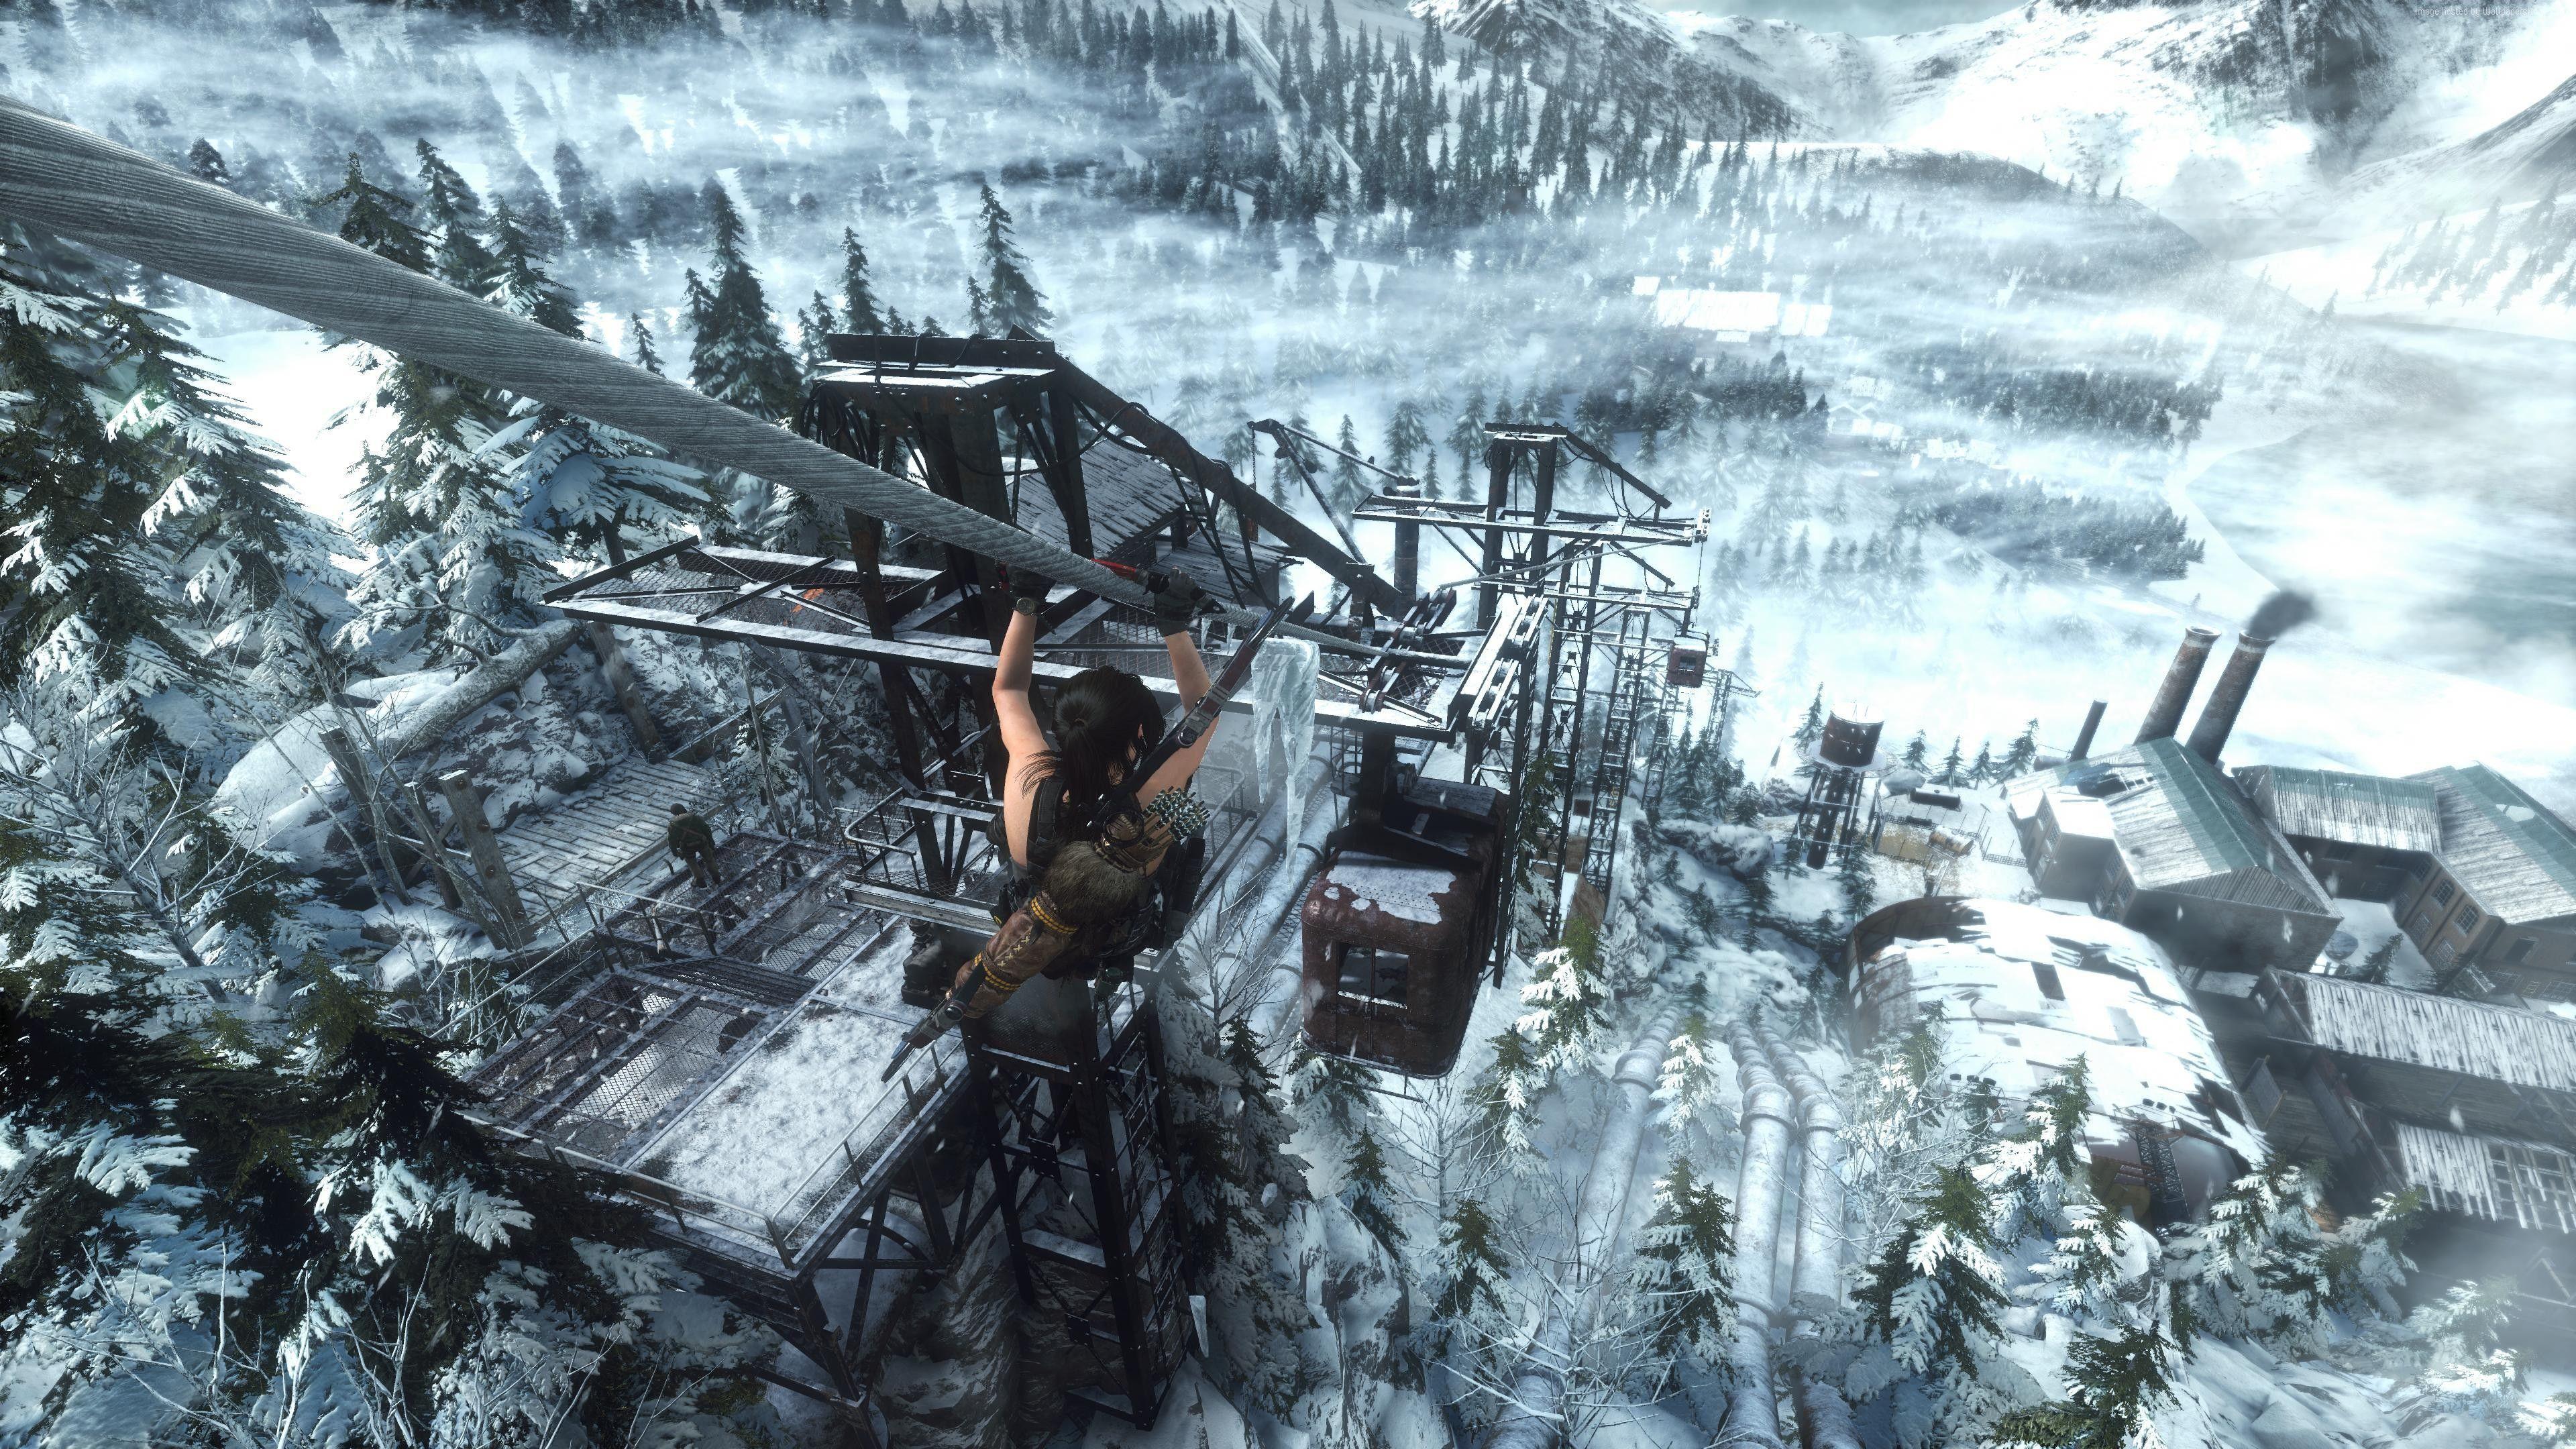 Rise of the Tomb Raider Wallpaper, Games / Recent: Rise of the